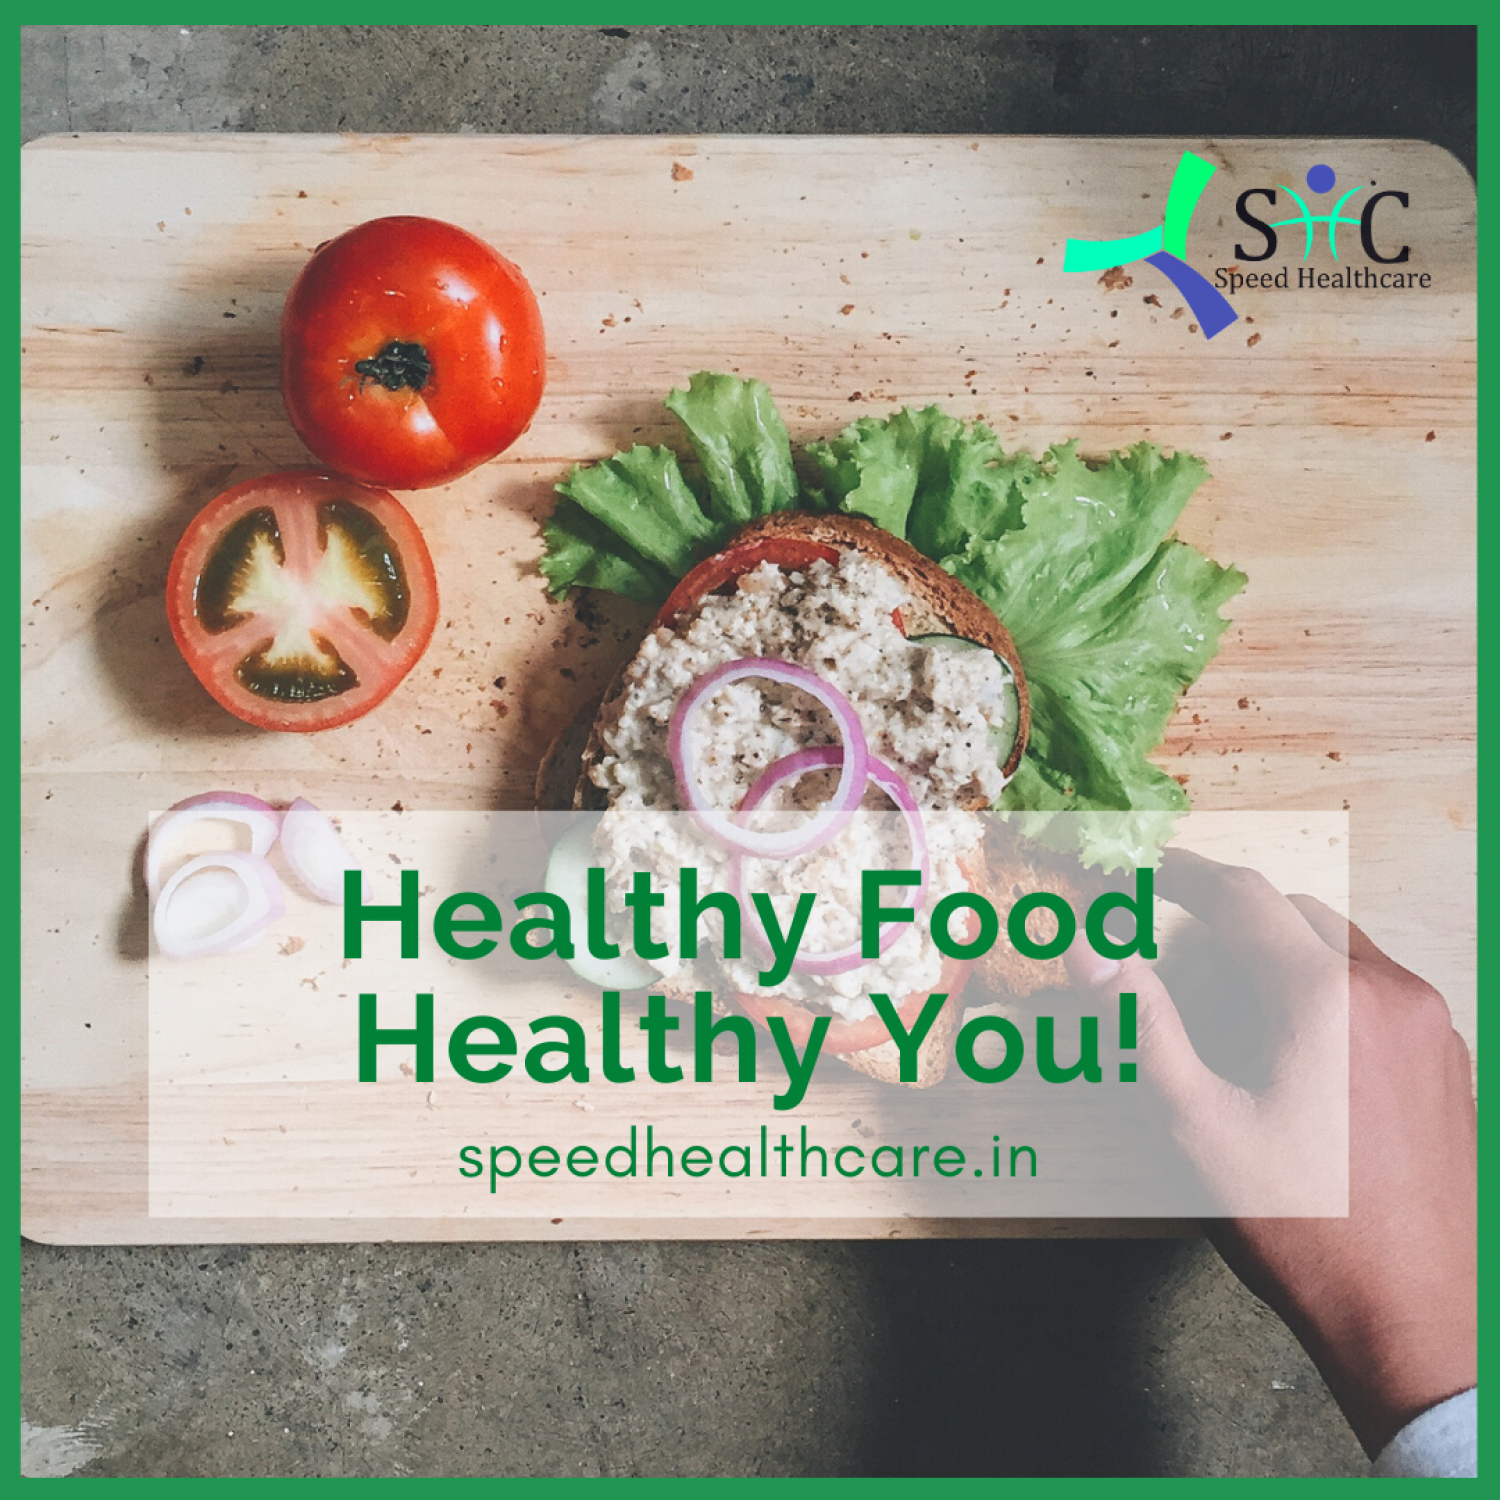 Healthy Food Healthy You! - Speedhealthcare.in Infographic